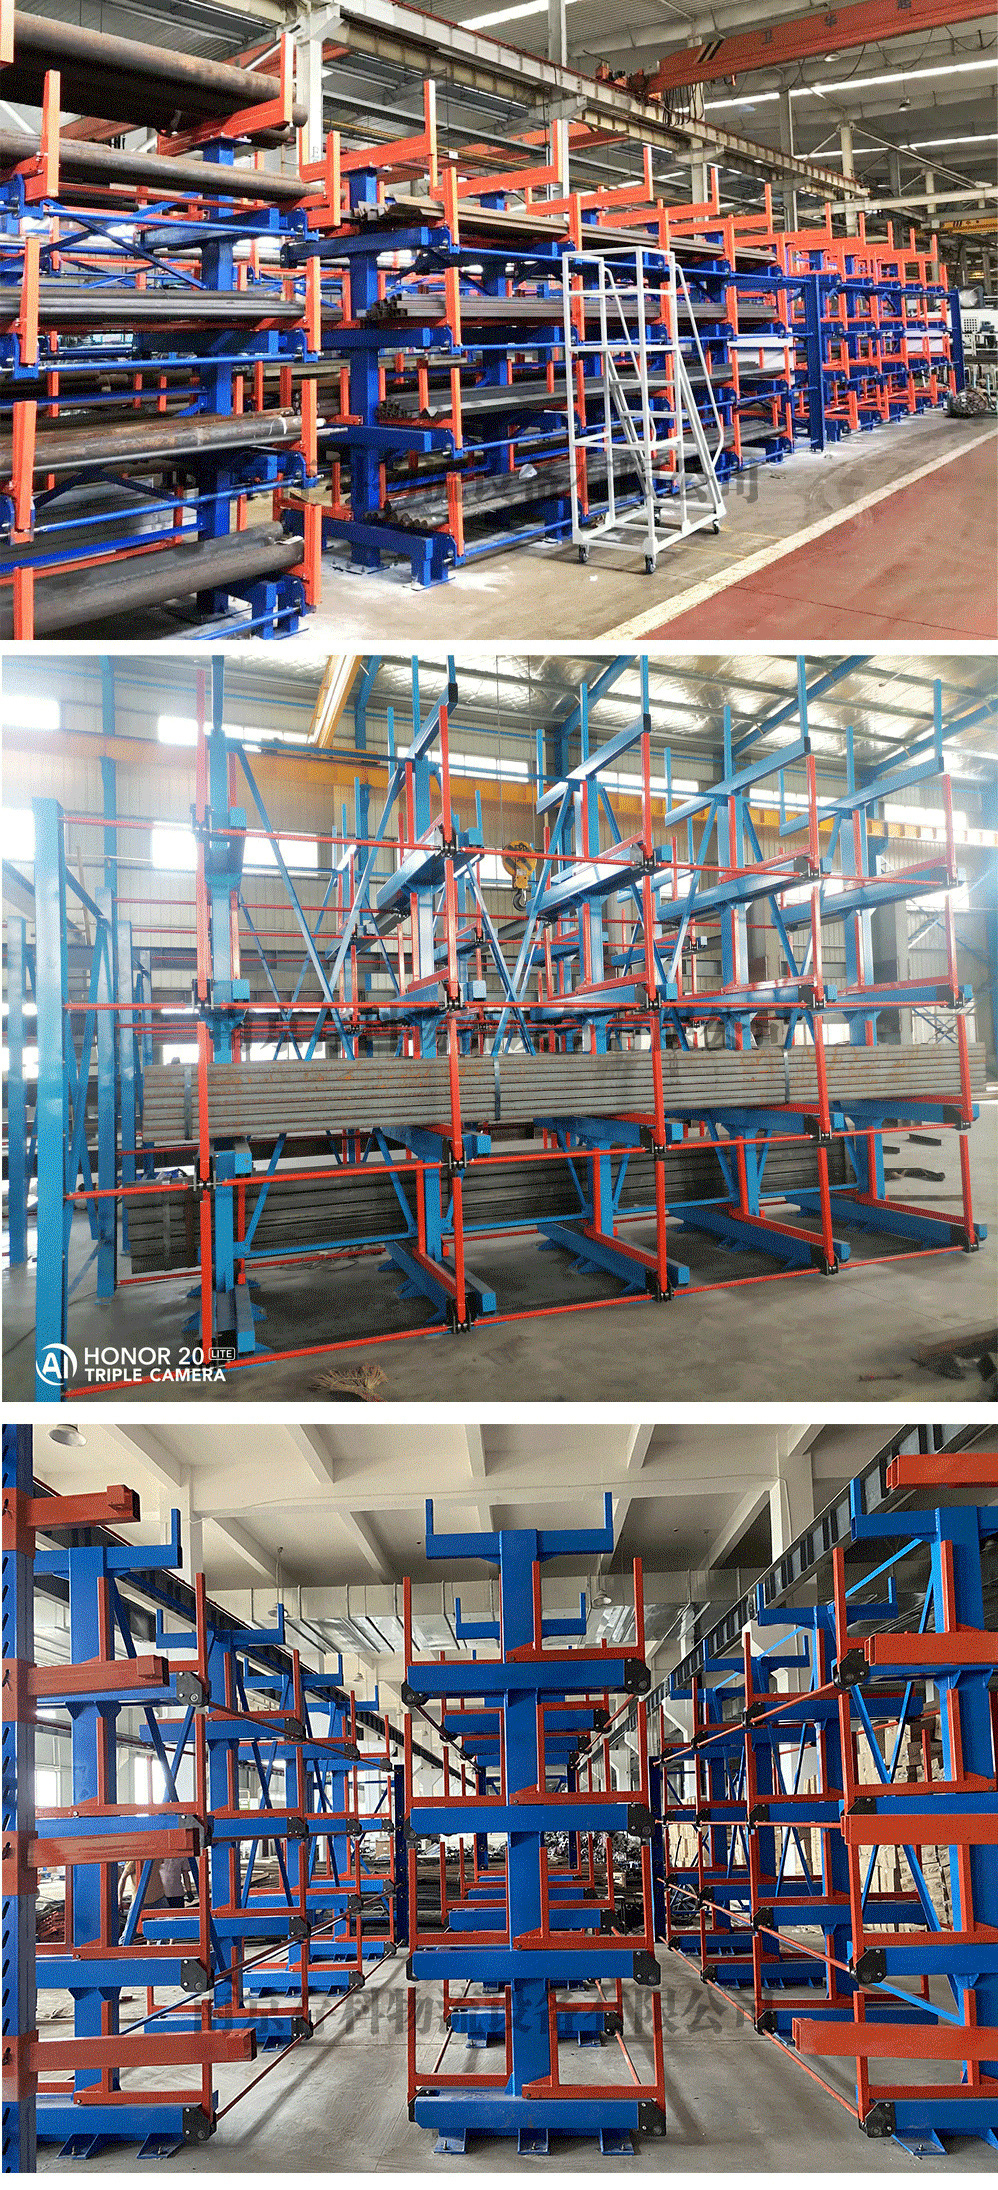 Cunko Steel Pipe Storage Rack Telescopic Cantilever Shelf CK-SS-88 Rocker Arm Profile Shelf for Storage of Shaft Materials and Bars